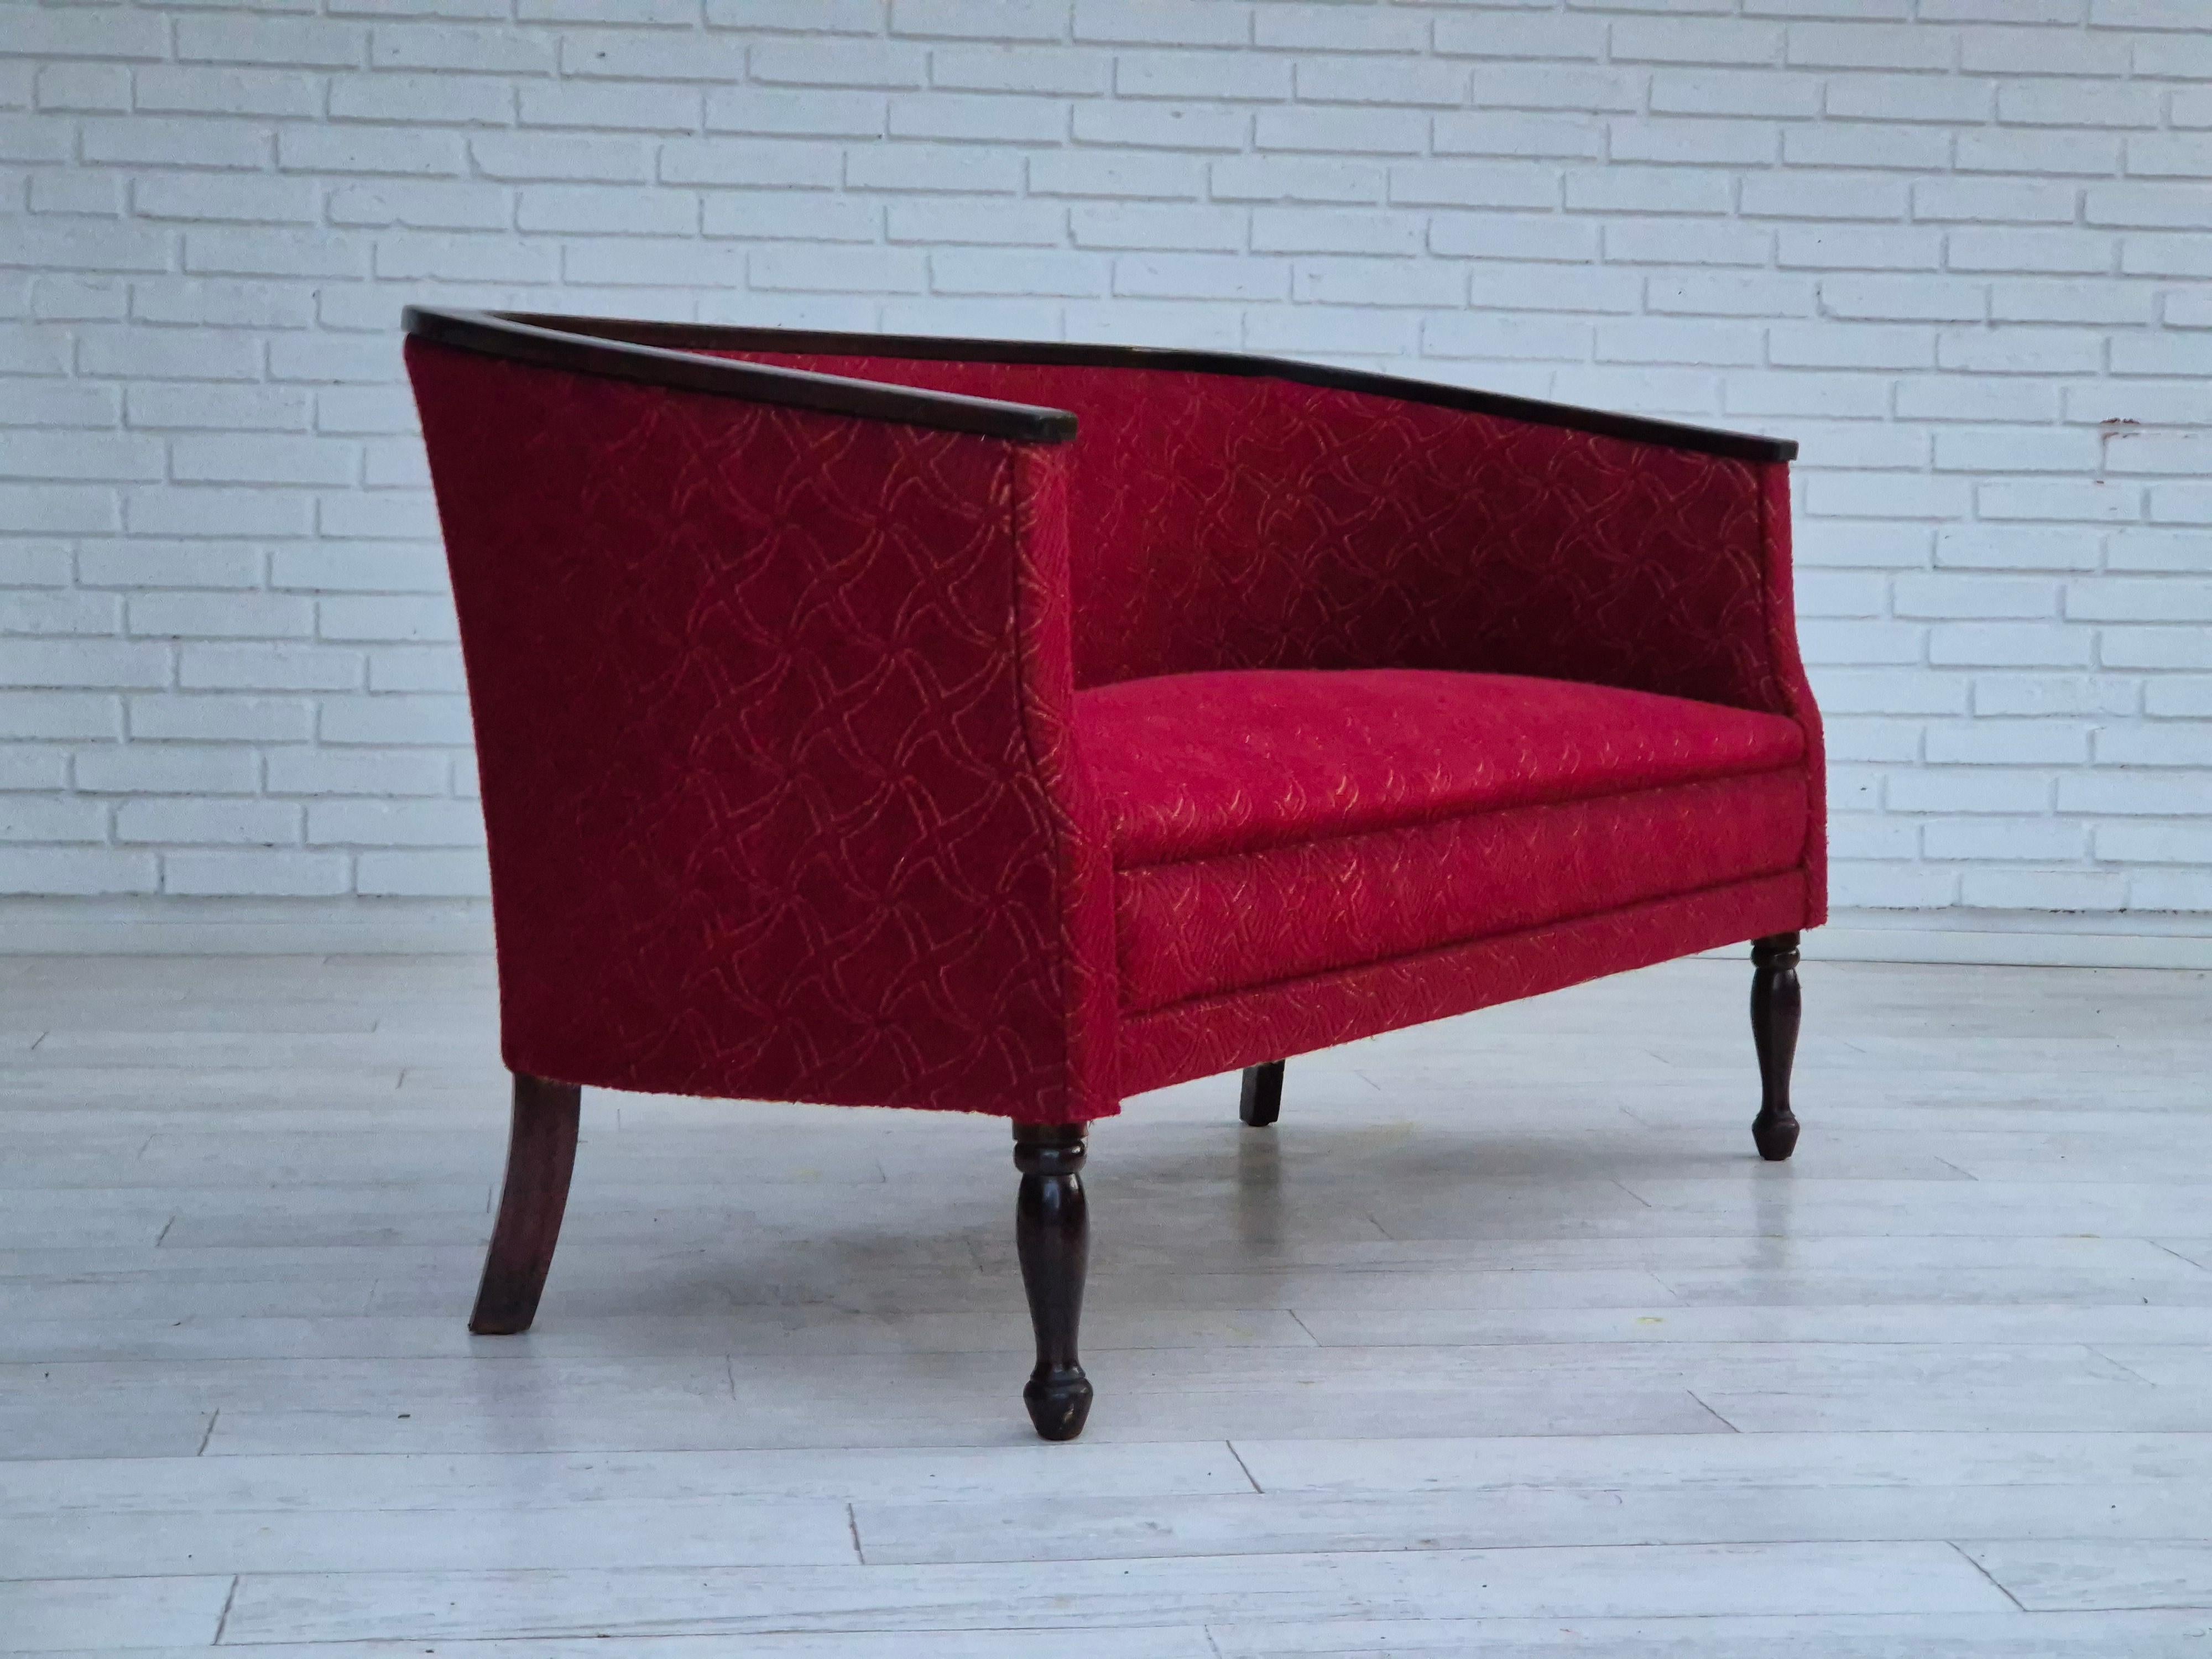 1950s, Danish 2 seater sofa in original very good condition: no smells and no stains. Red furniture fabric, dark lacquered ash wood legs and armrests. Brass springs in the seat. New springs belts under seat. Manufactured by Danish furniture